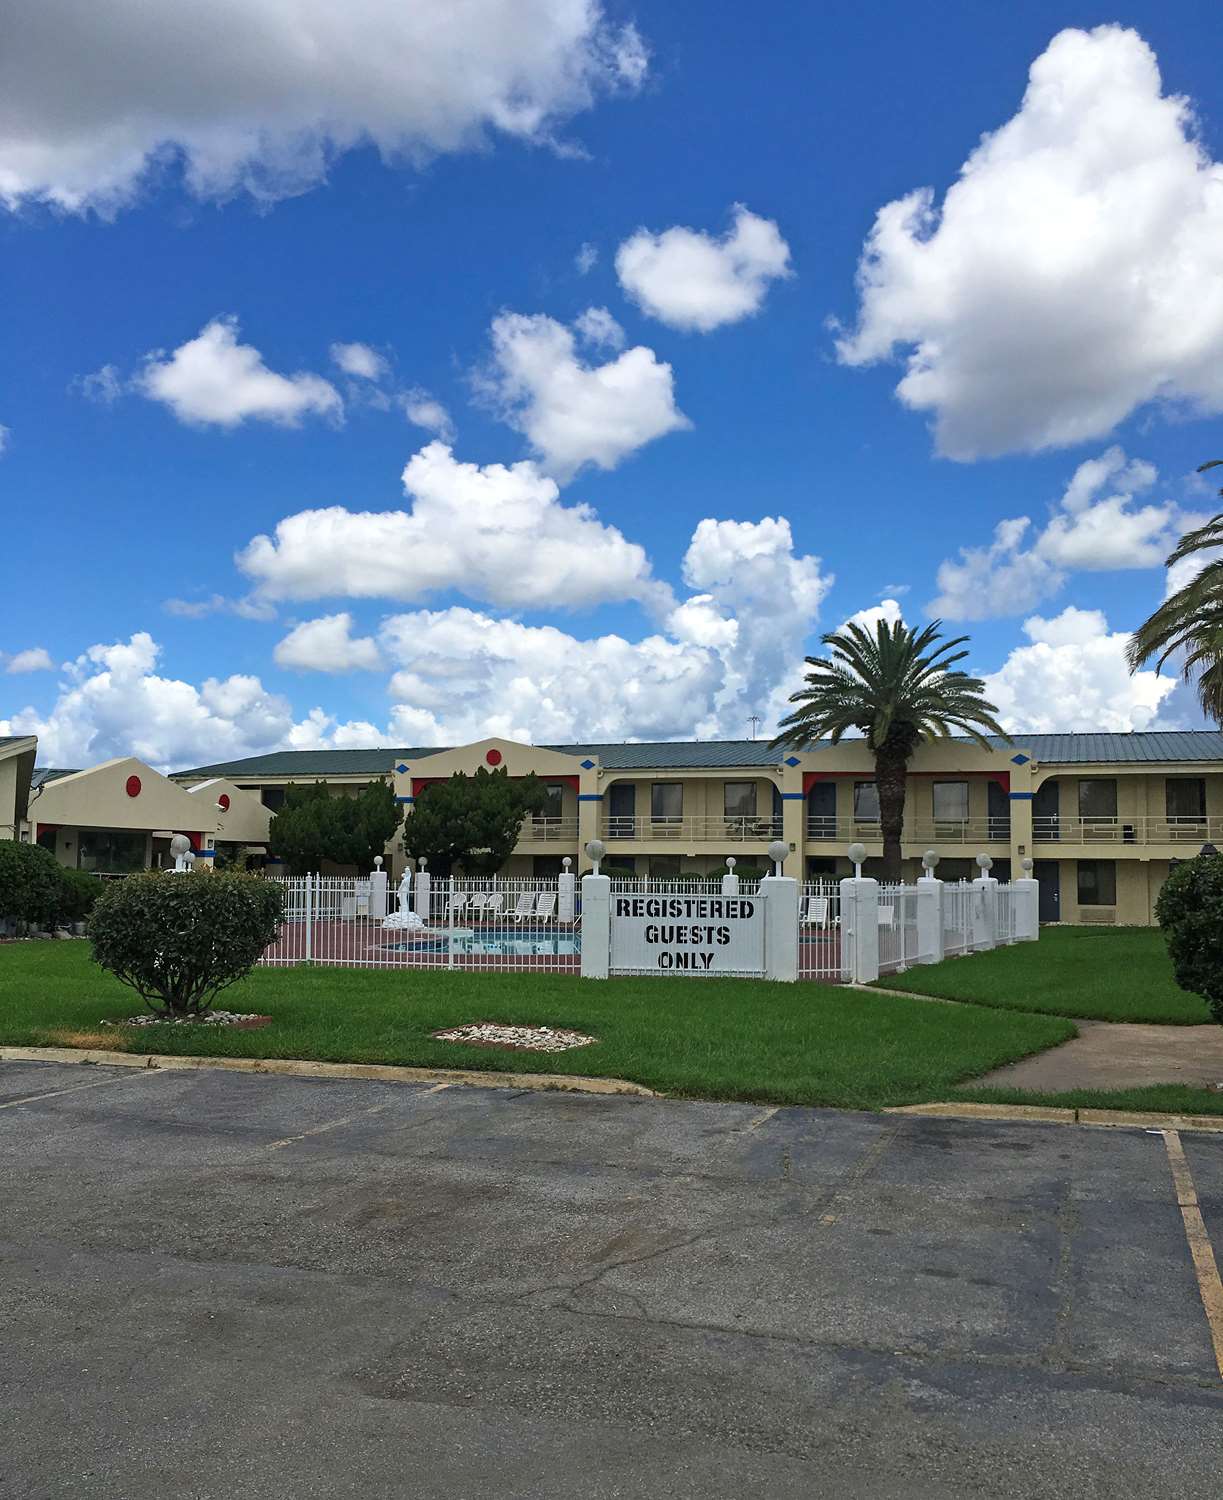 Pet Friendly Americas Best Value Inn-Beaumont / I-10 in Beaumont, Texas